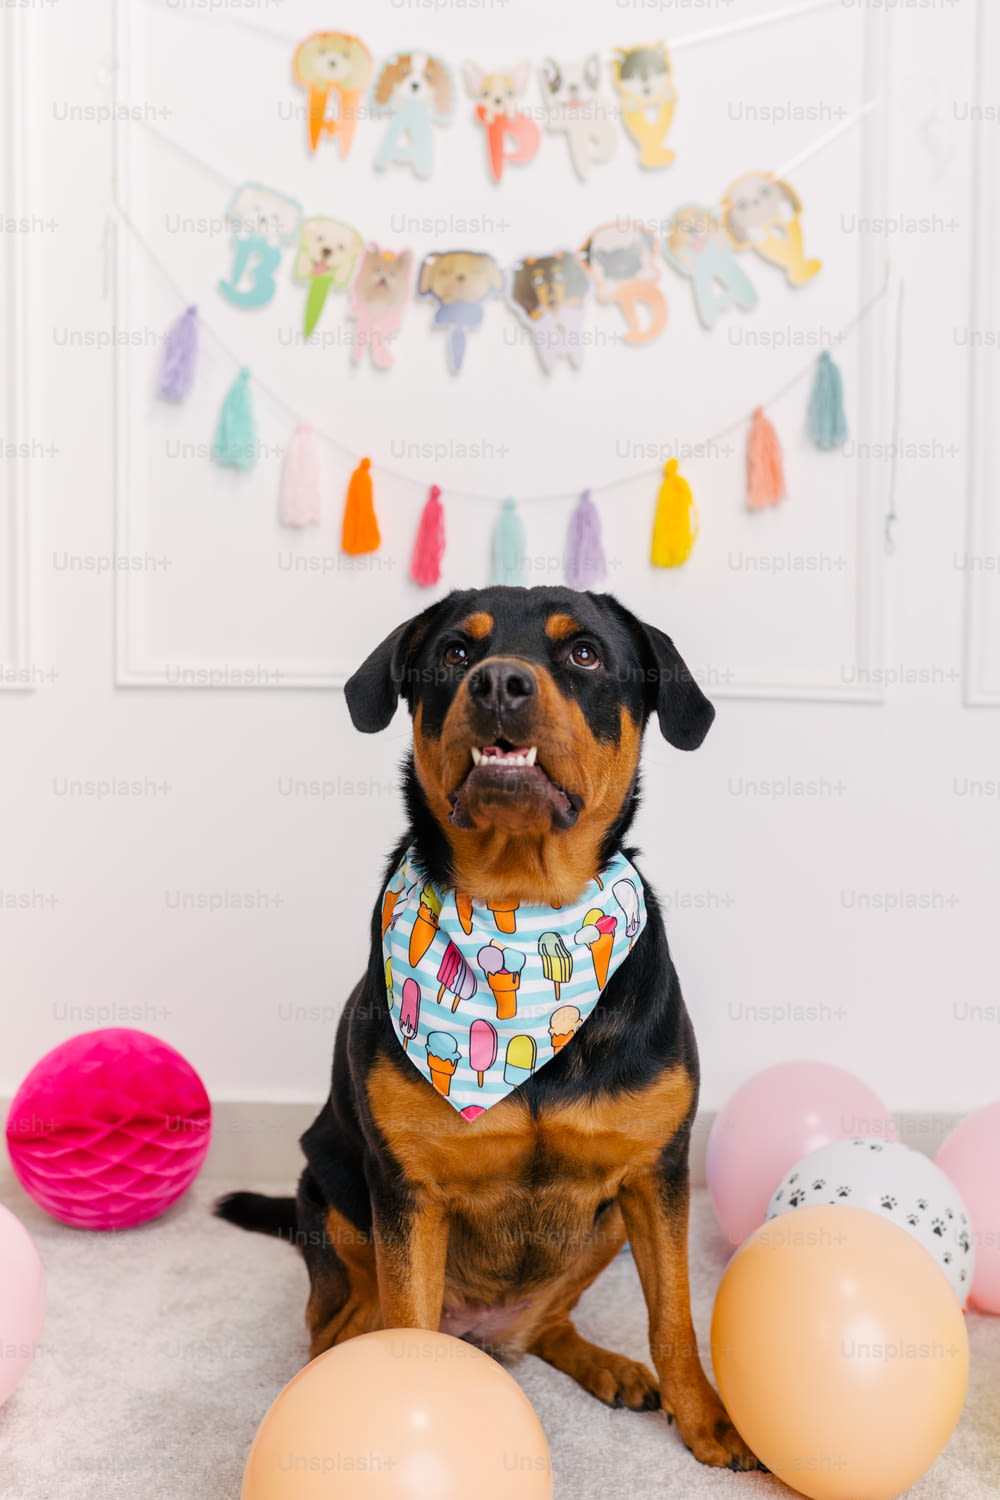 a black and brown dog wearing a bib sitting in front of balloons